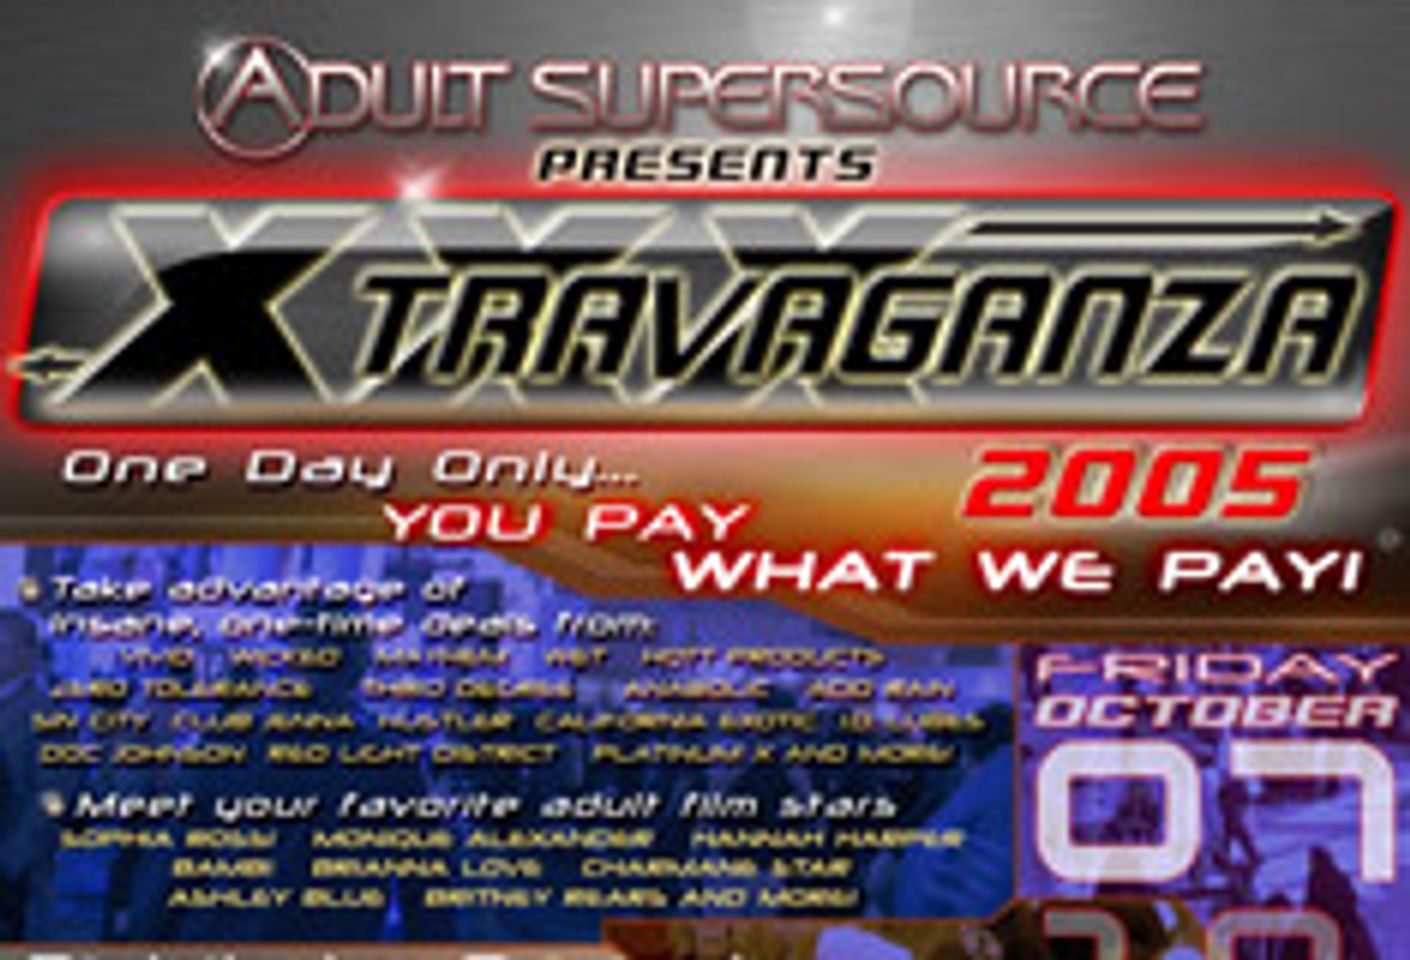 Adult Supersource Xtravaganza Friday